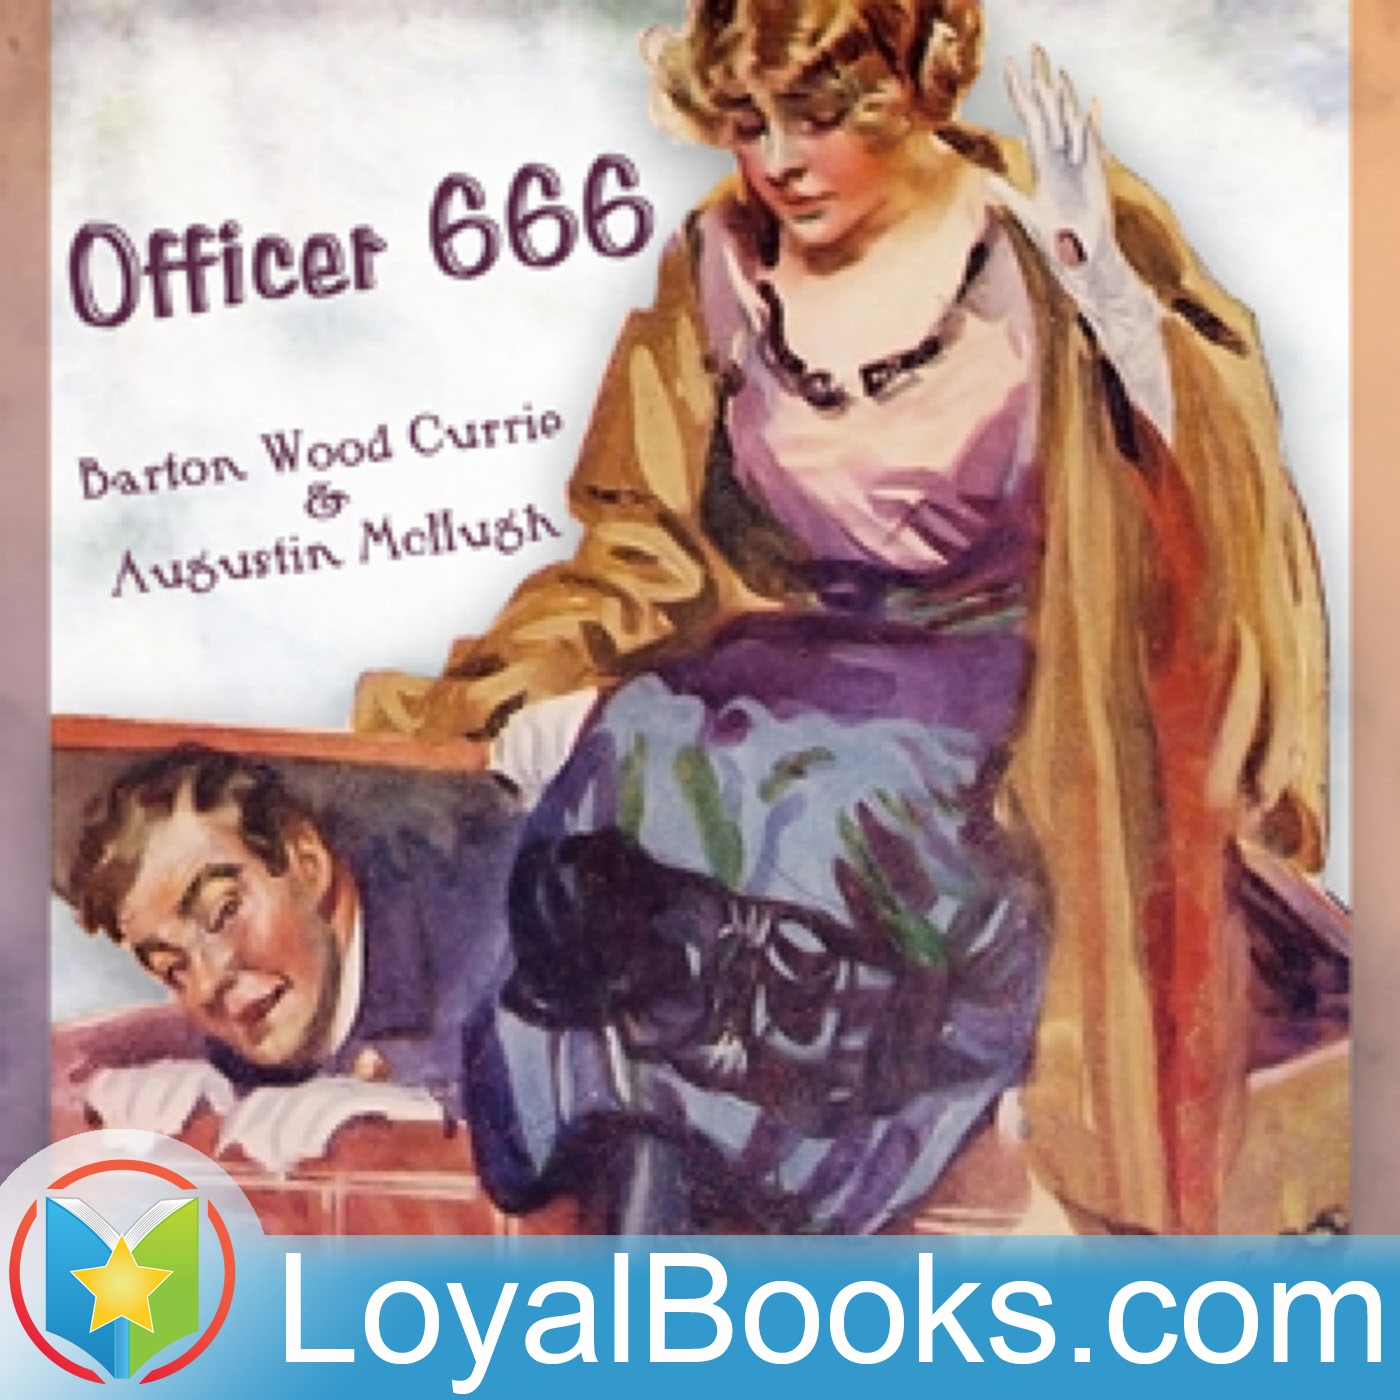 Officer 666 by Barton Wood Currie